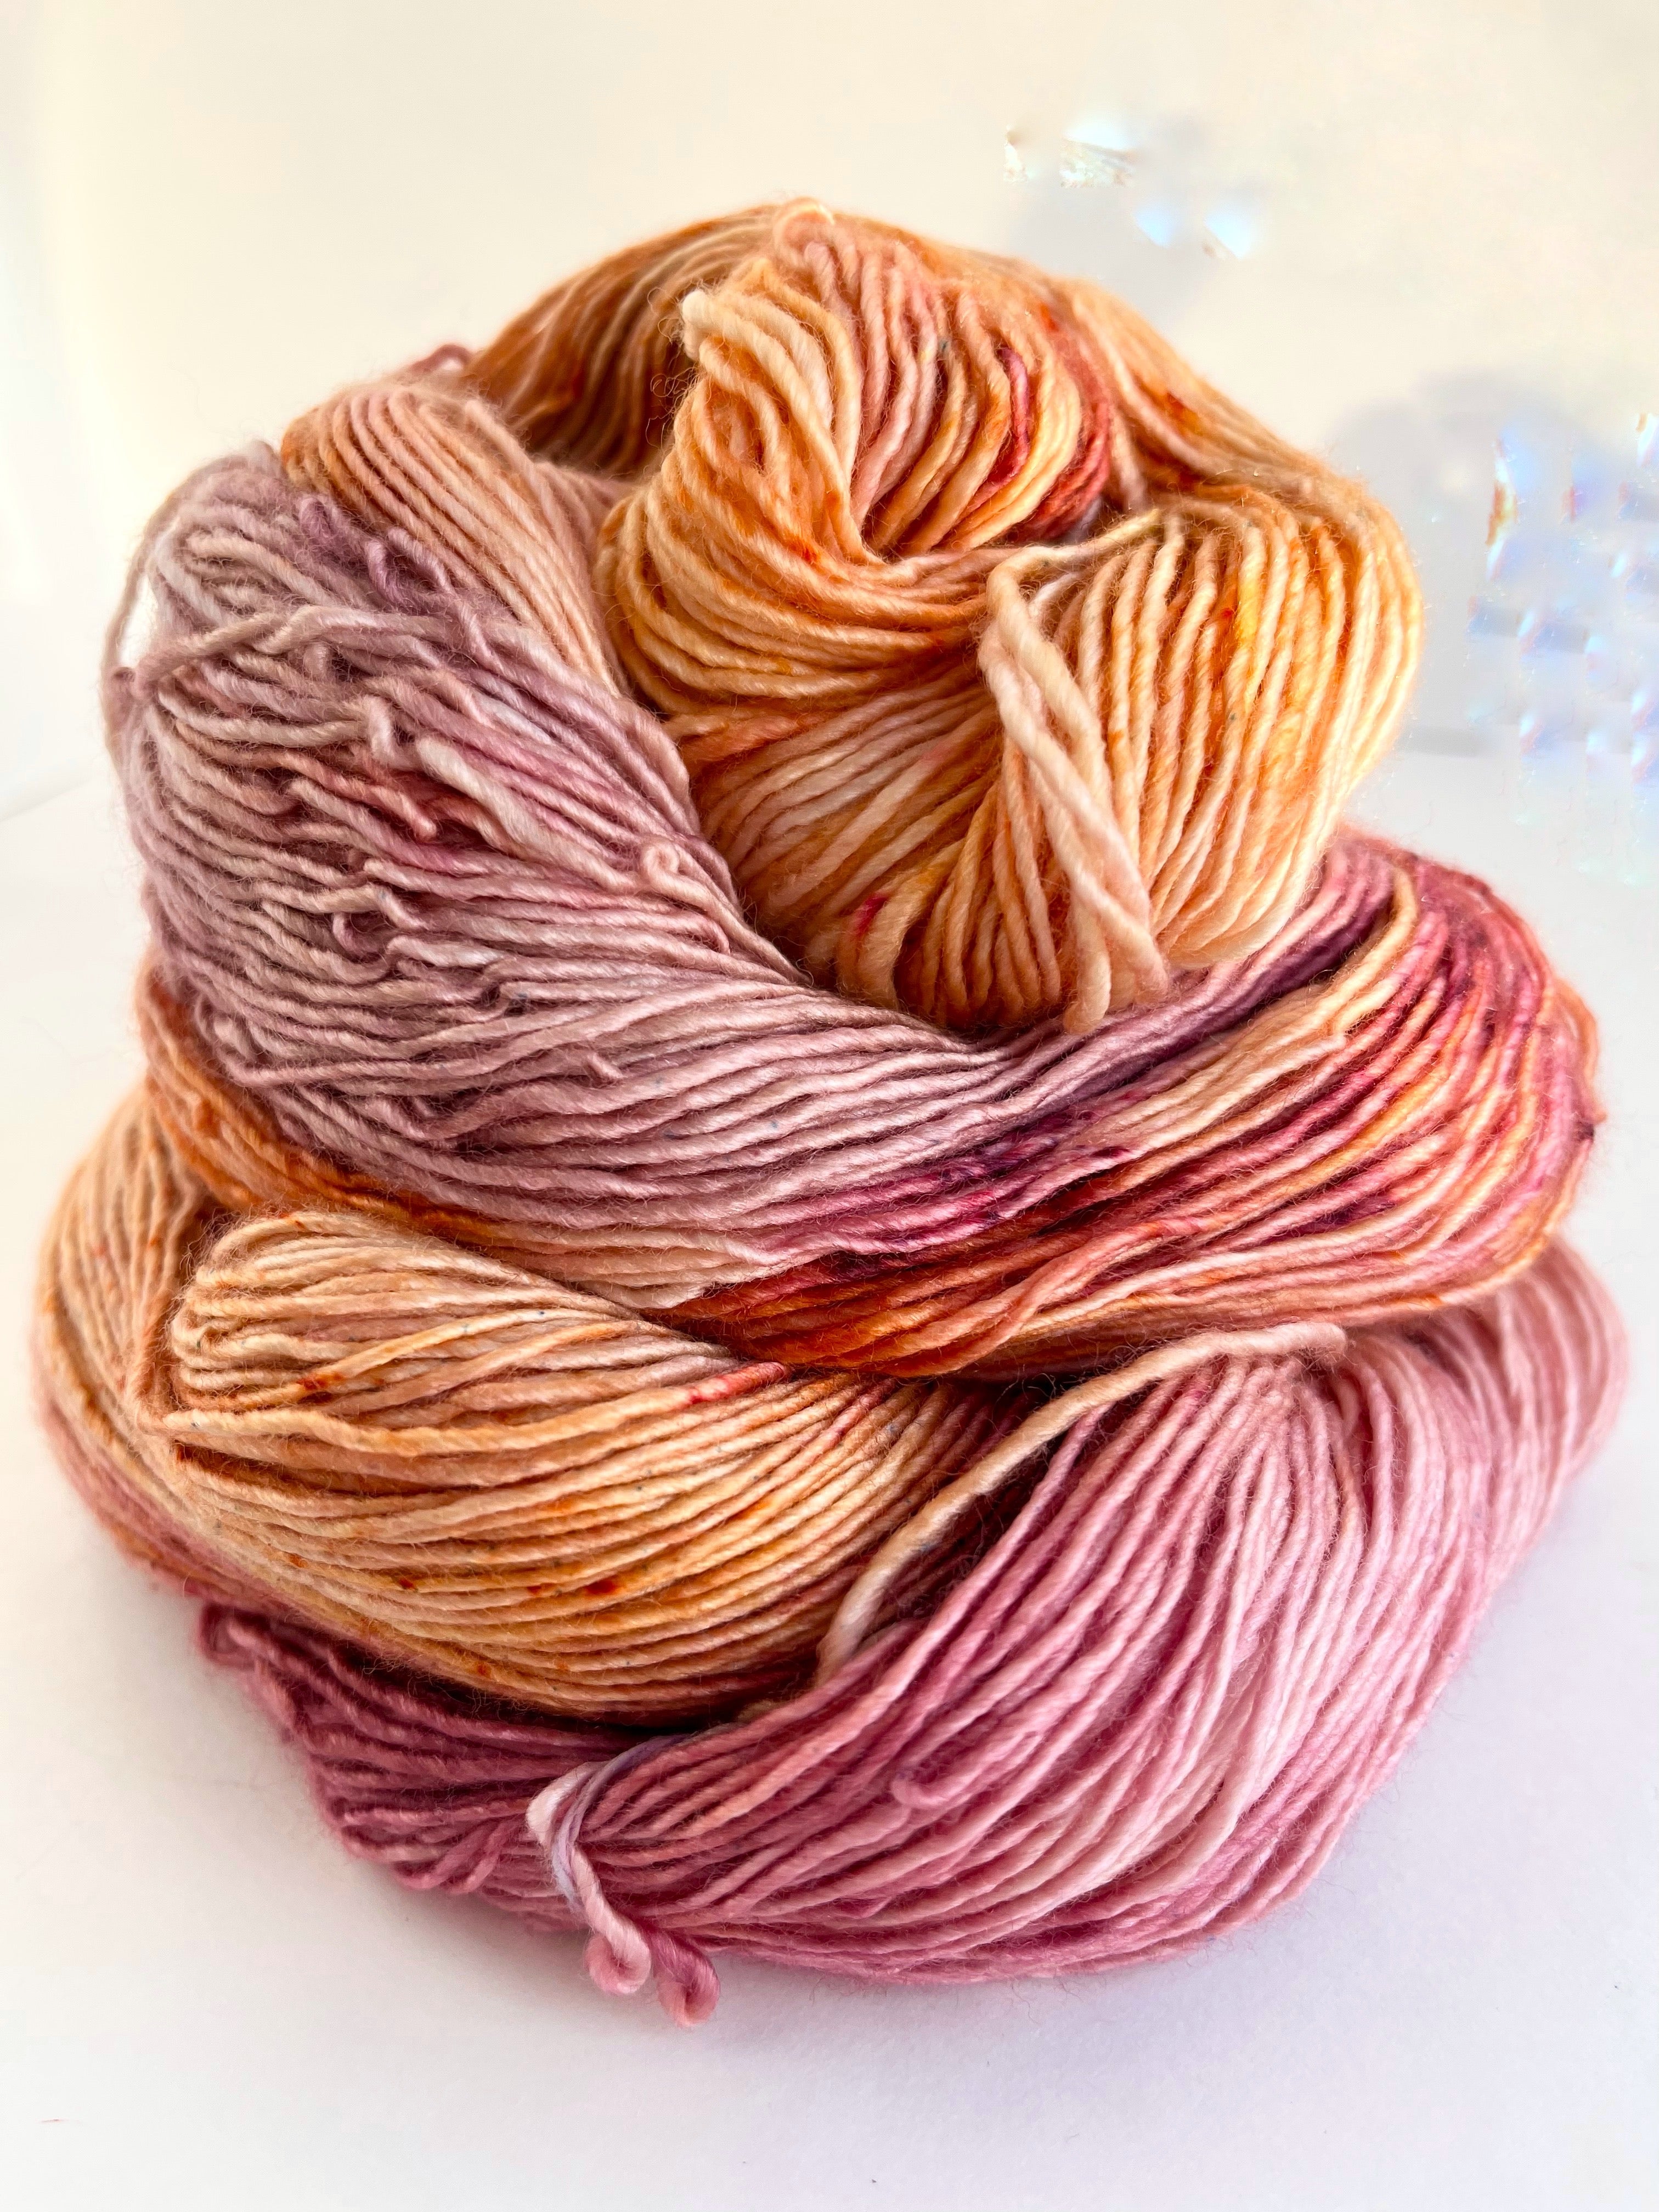 Finntown - River Silk and Merino from Tributary Yarns